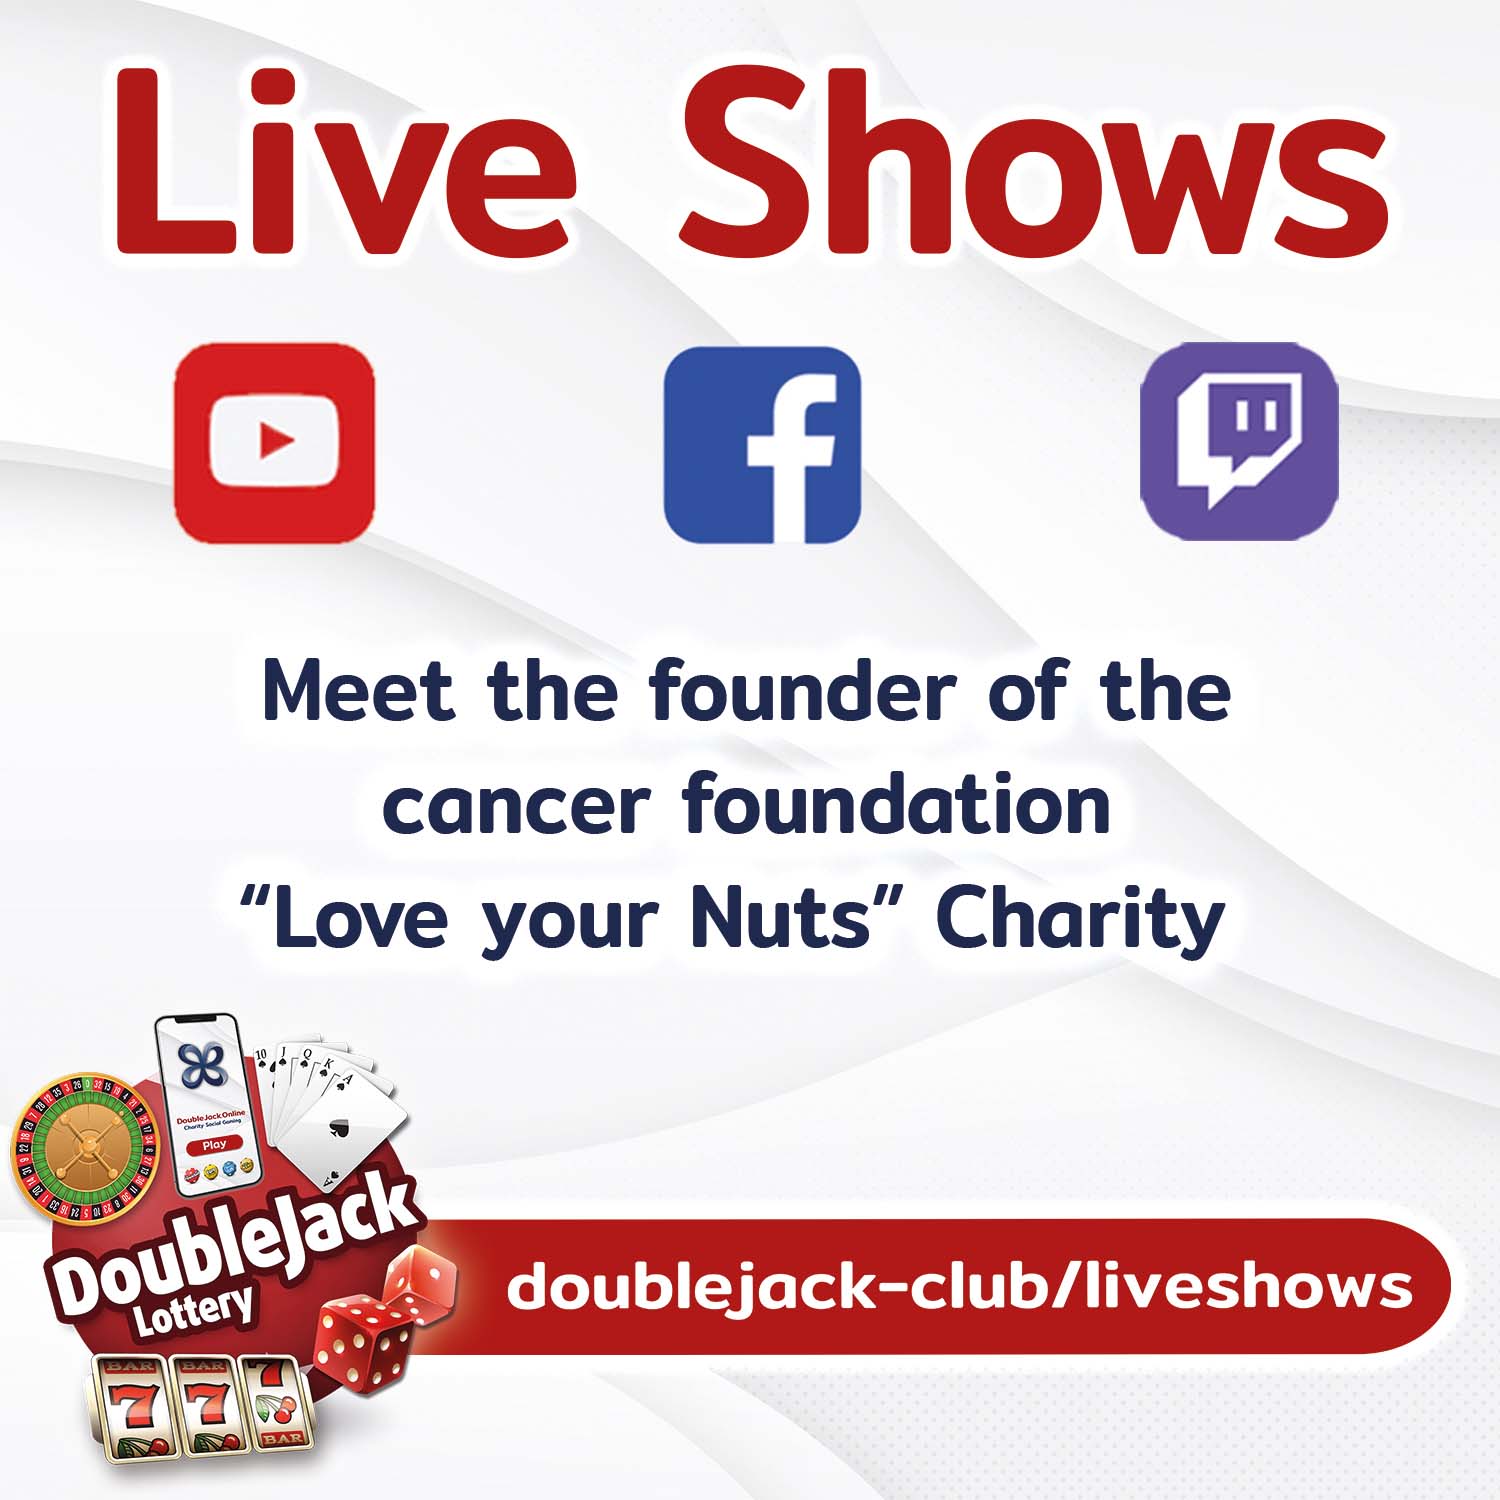 Live Shows - Love your Nuts" Charity